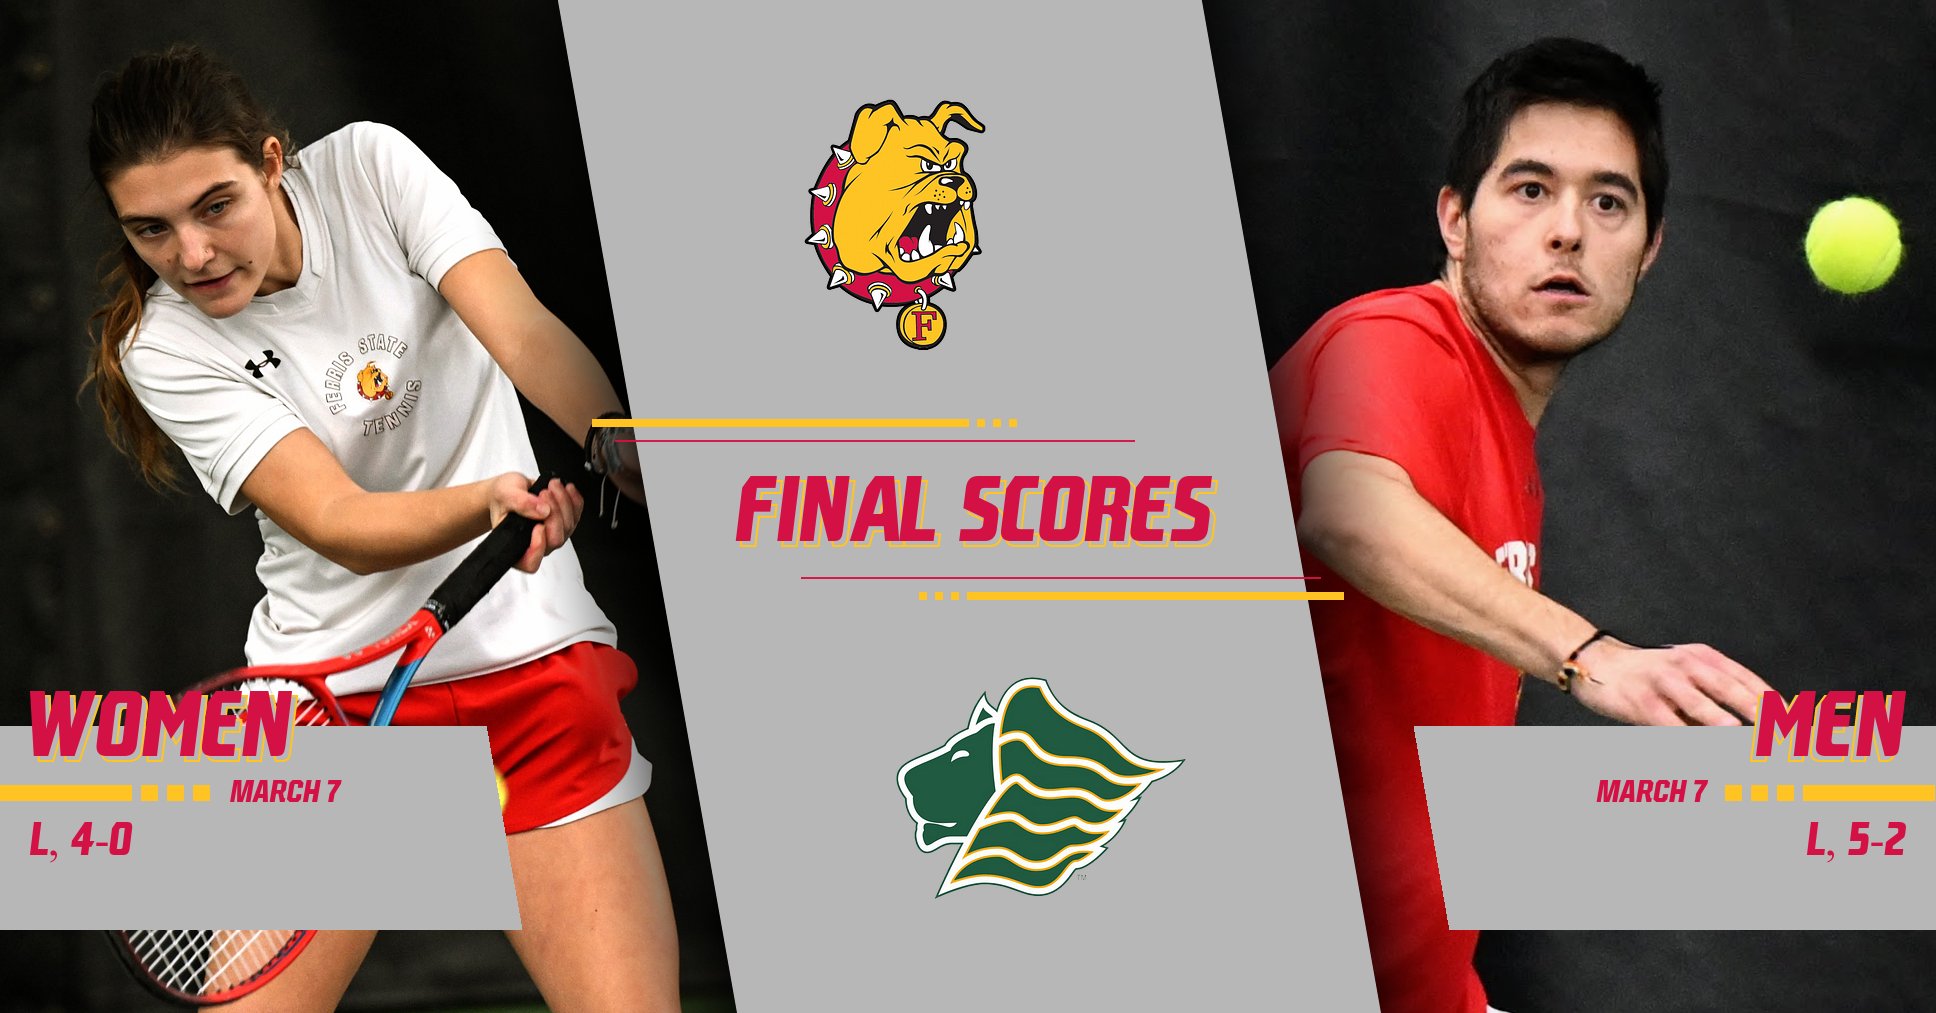 Ferris State Tennis Squads Take On National Power Saint Leo In Florida Action